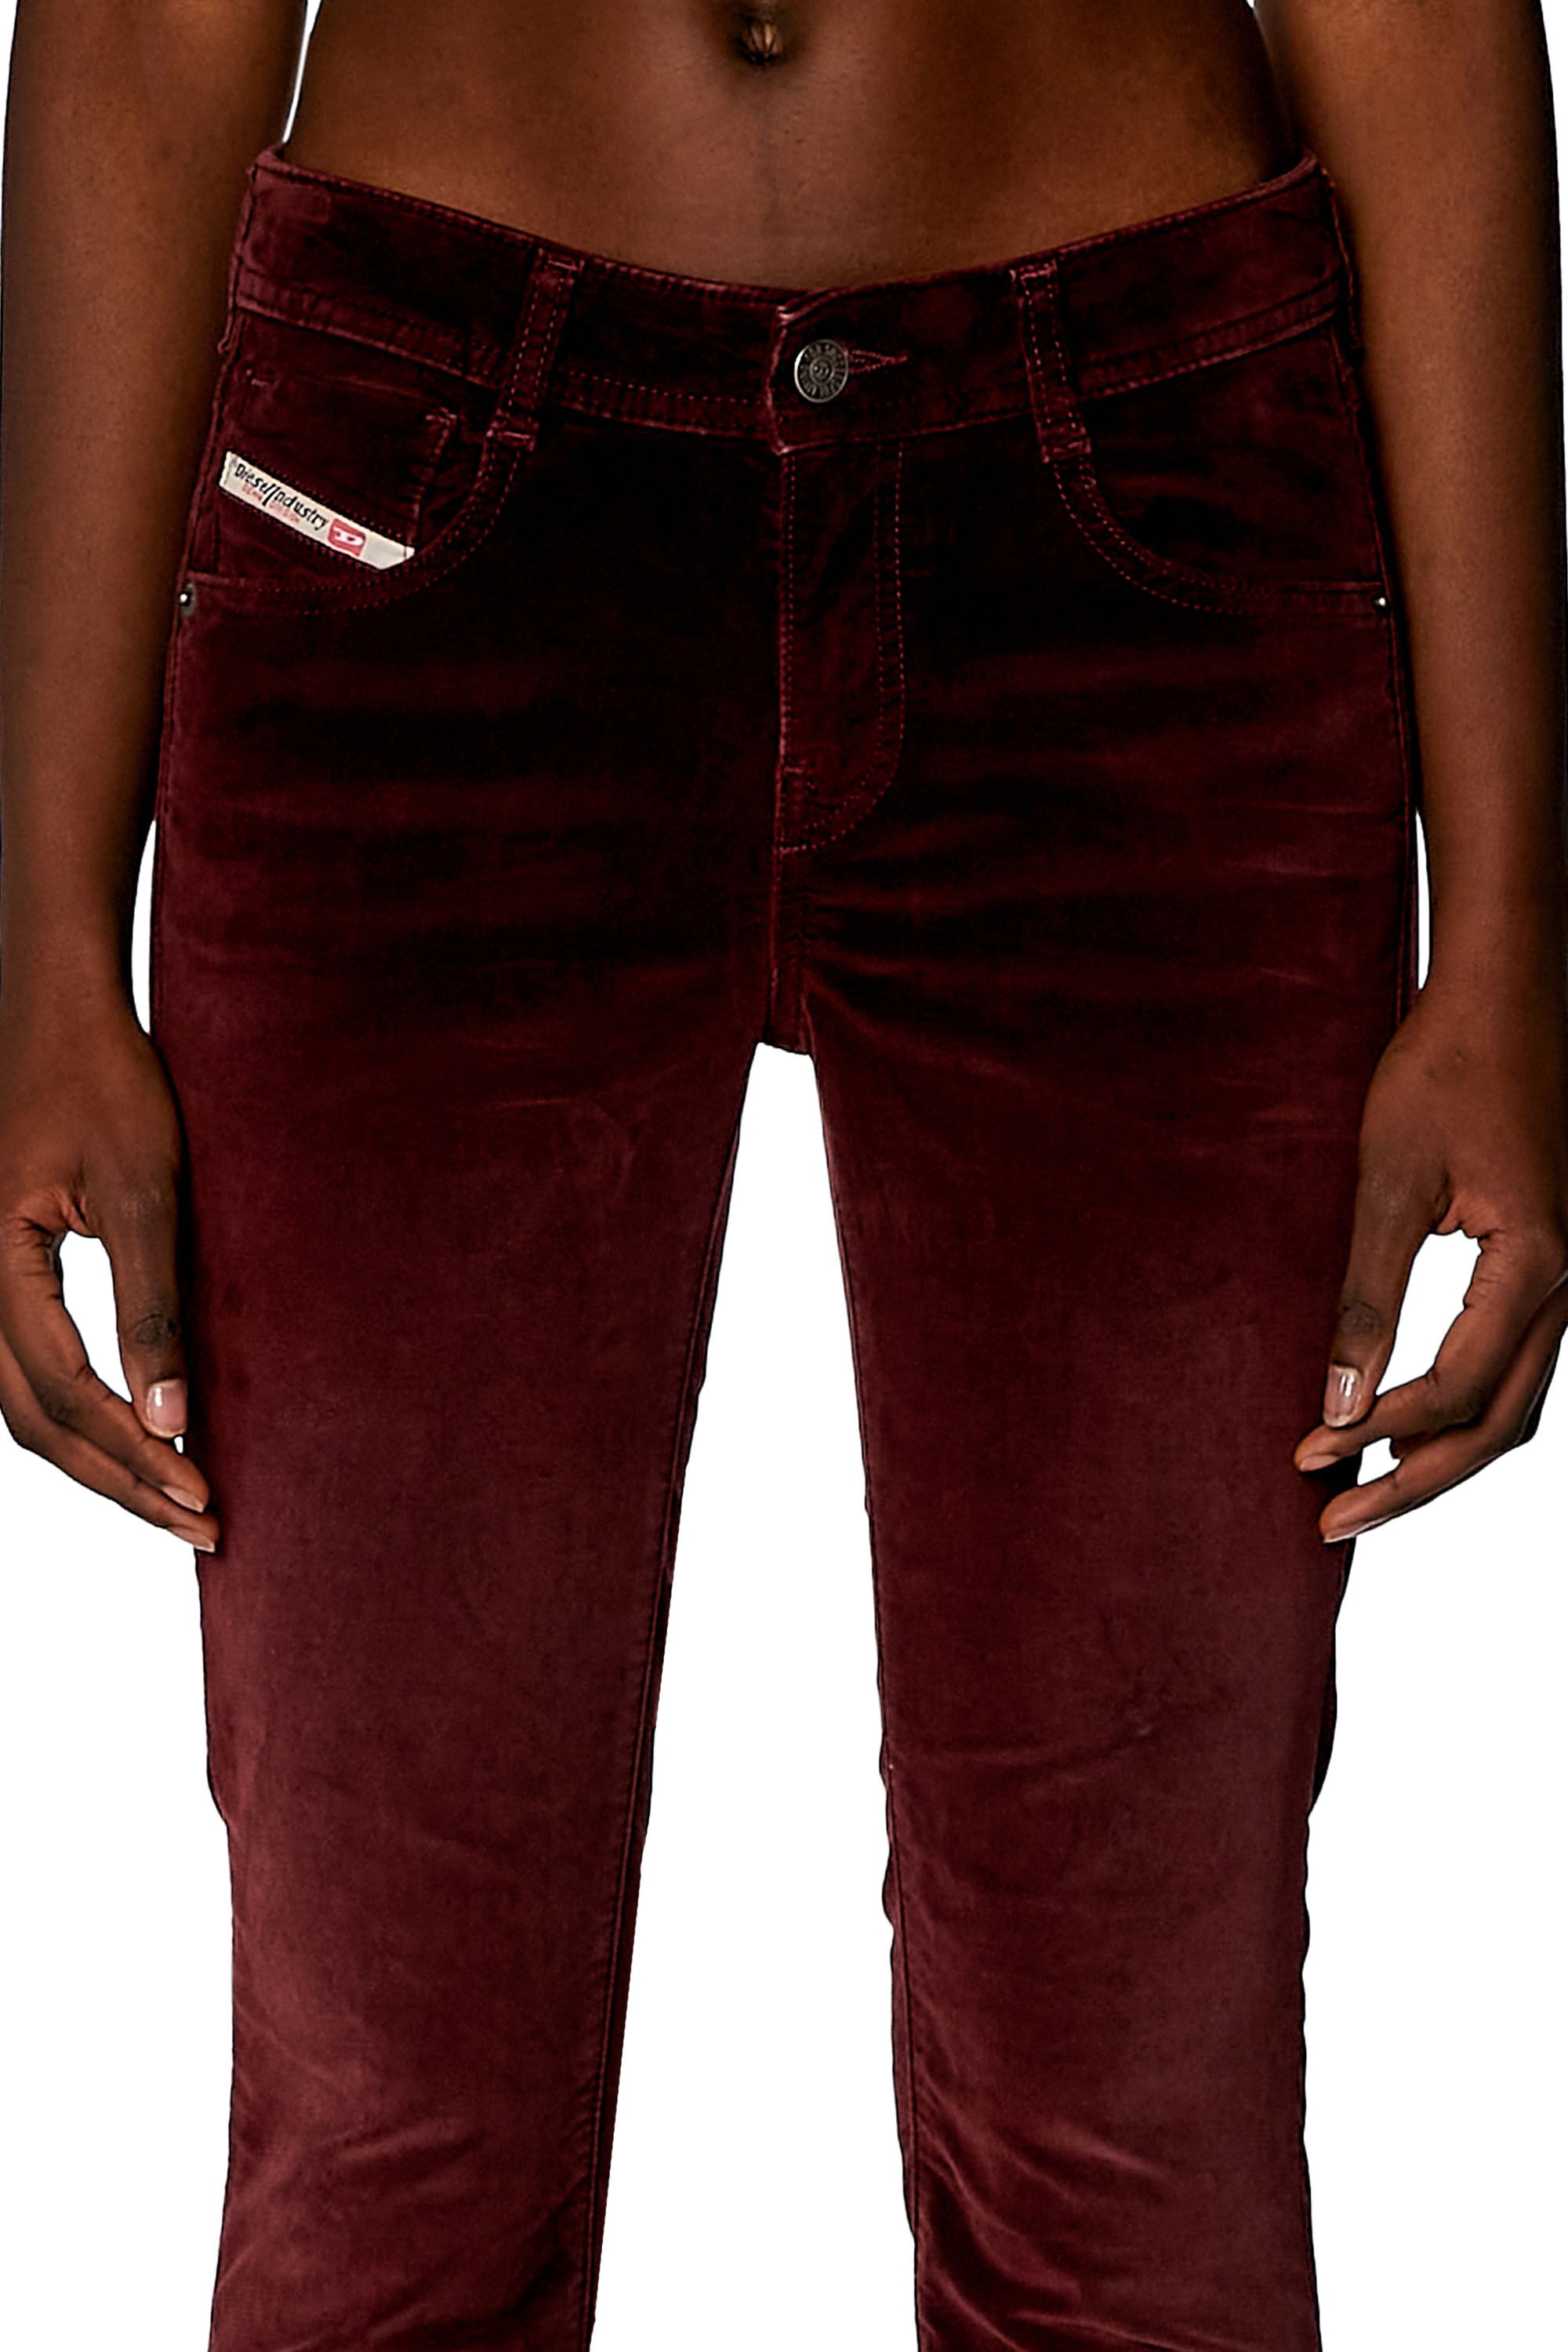 BOOTCUT AND FLARE JEANS 1969 D-EBBEY 003HL - 4